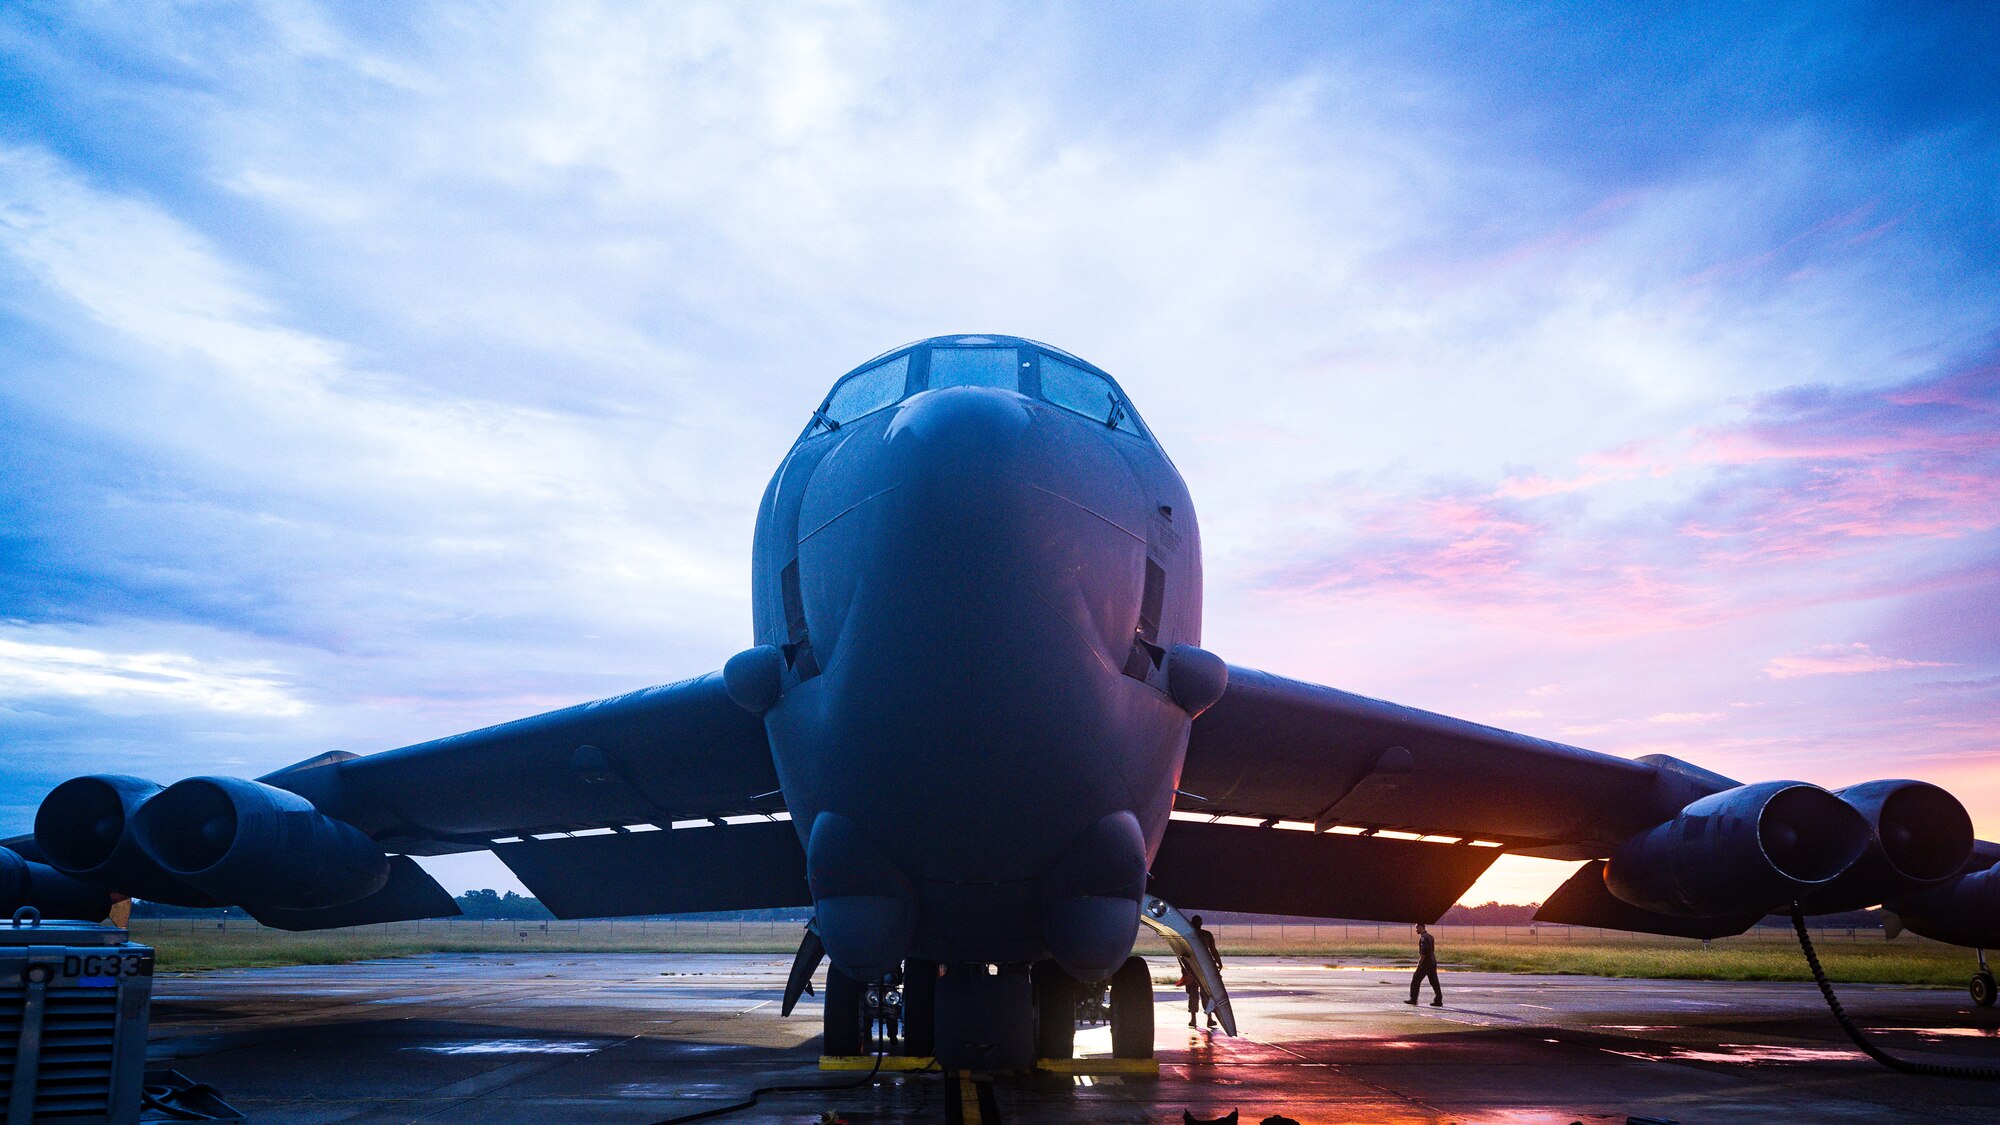 Airmen of the 96th Bomb Squadron prepare a B-52H Stratofortress for takeoff during exercise Global Storm at Barksdale Air Force Base, Louisiana, Aug. 18, 2021.